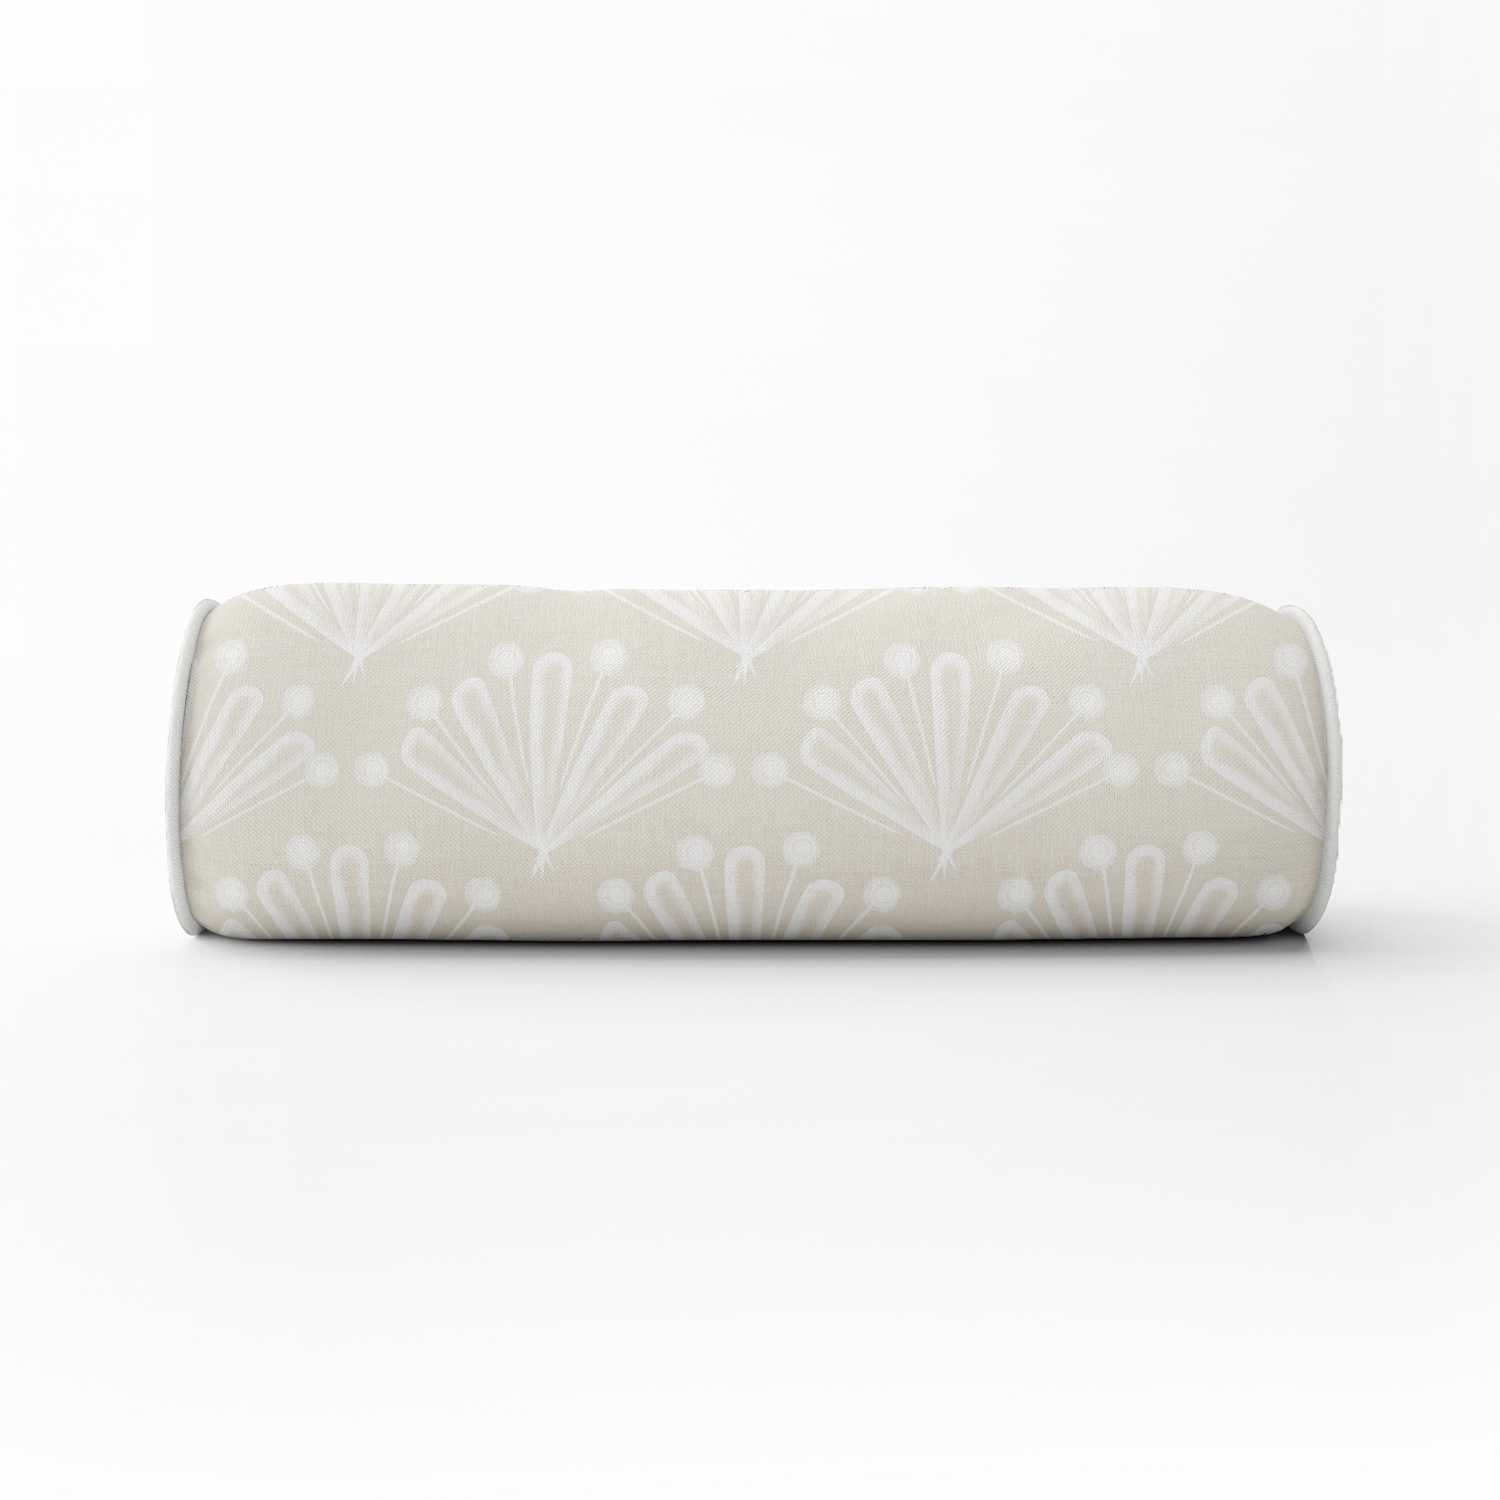 large-scale-neutral-flower-bolster-ivory-piping.jpg